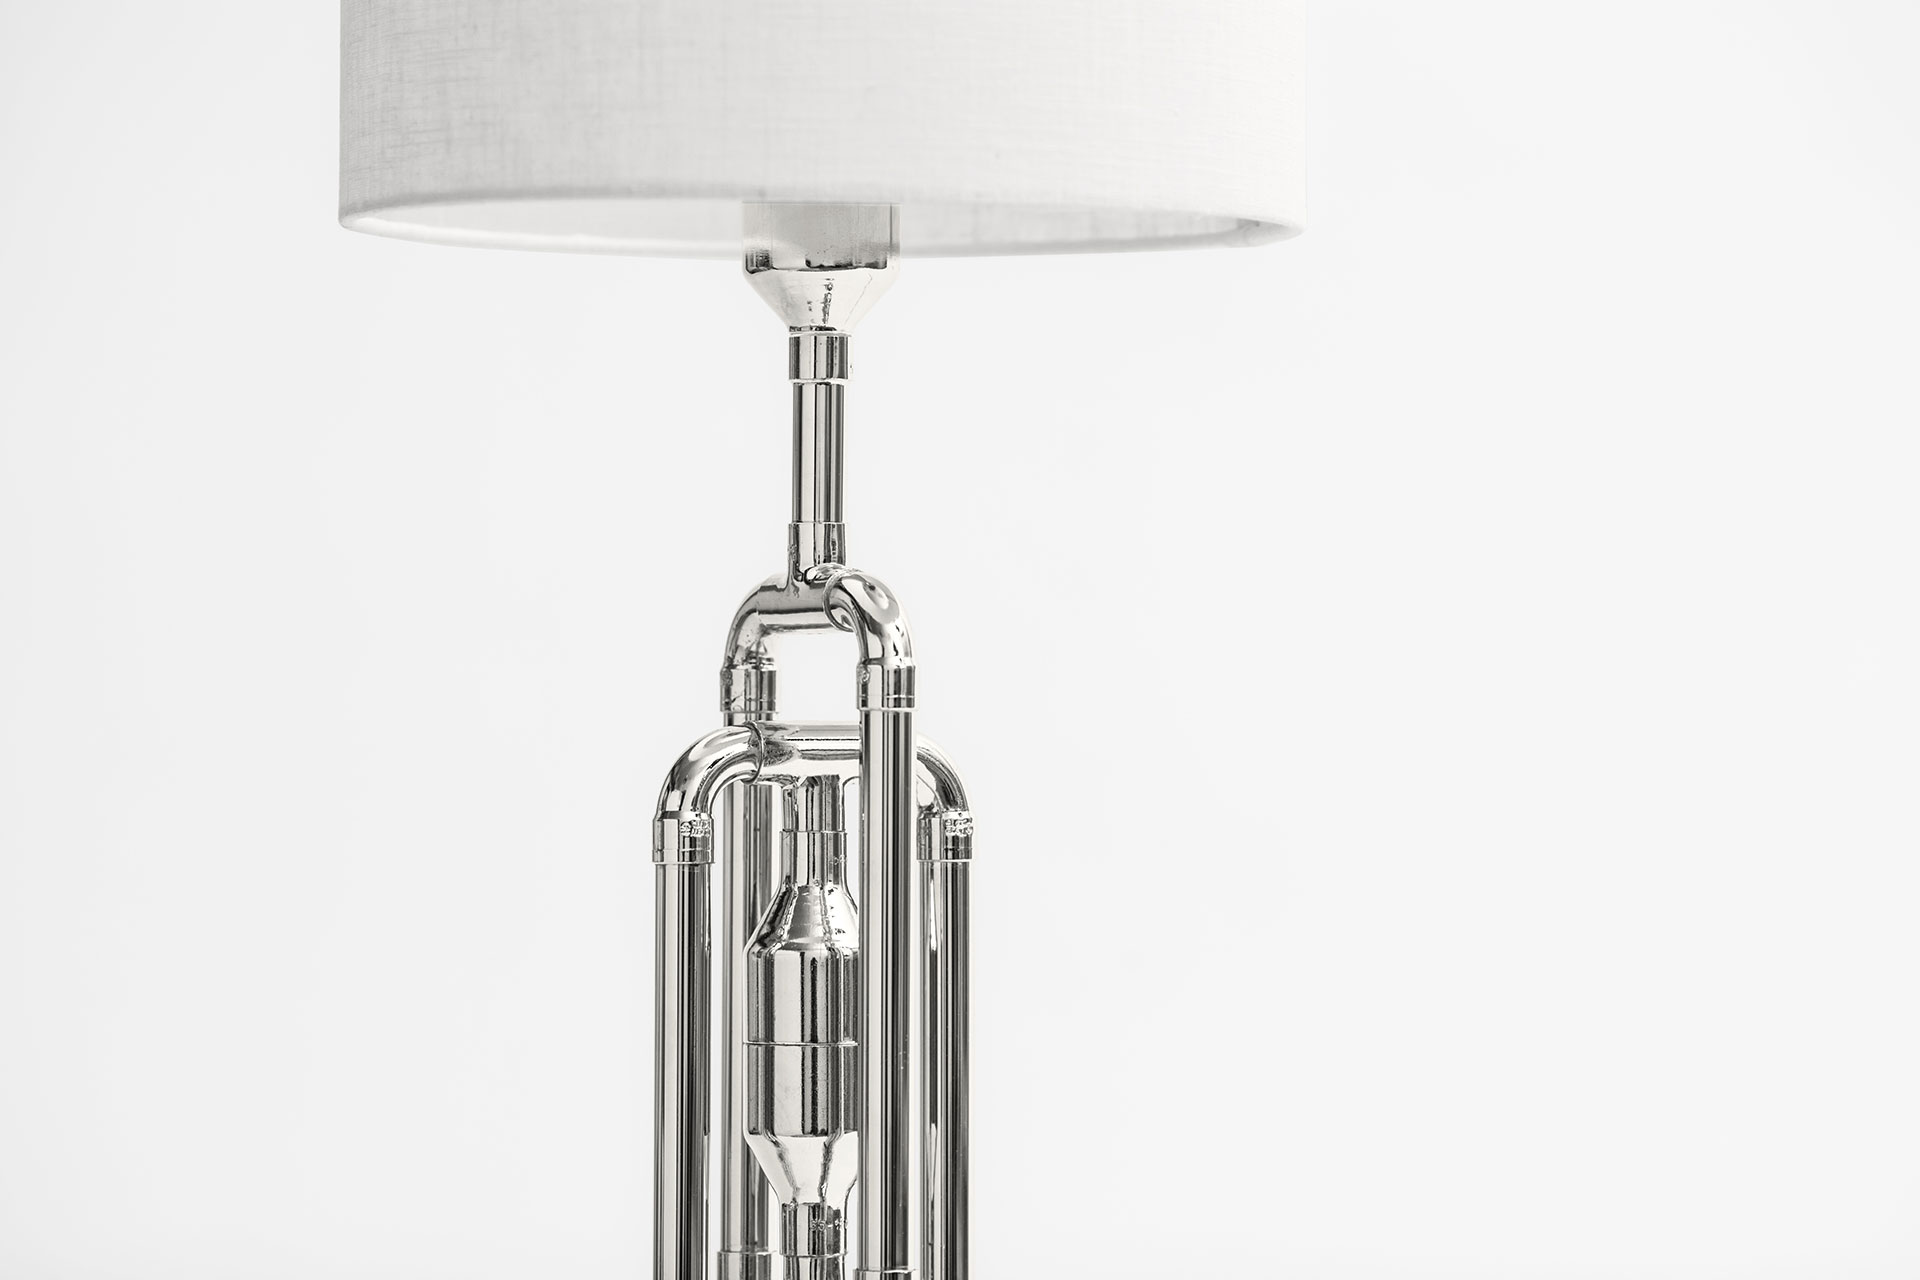 Nickel plated console lamp with white natural linen shade inspired by Art Deco design